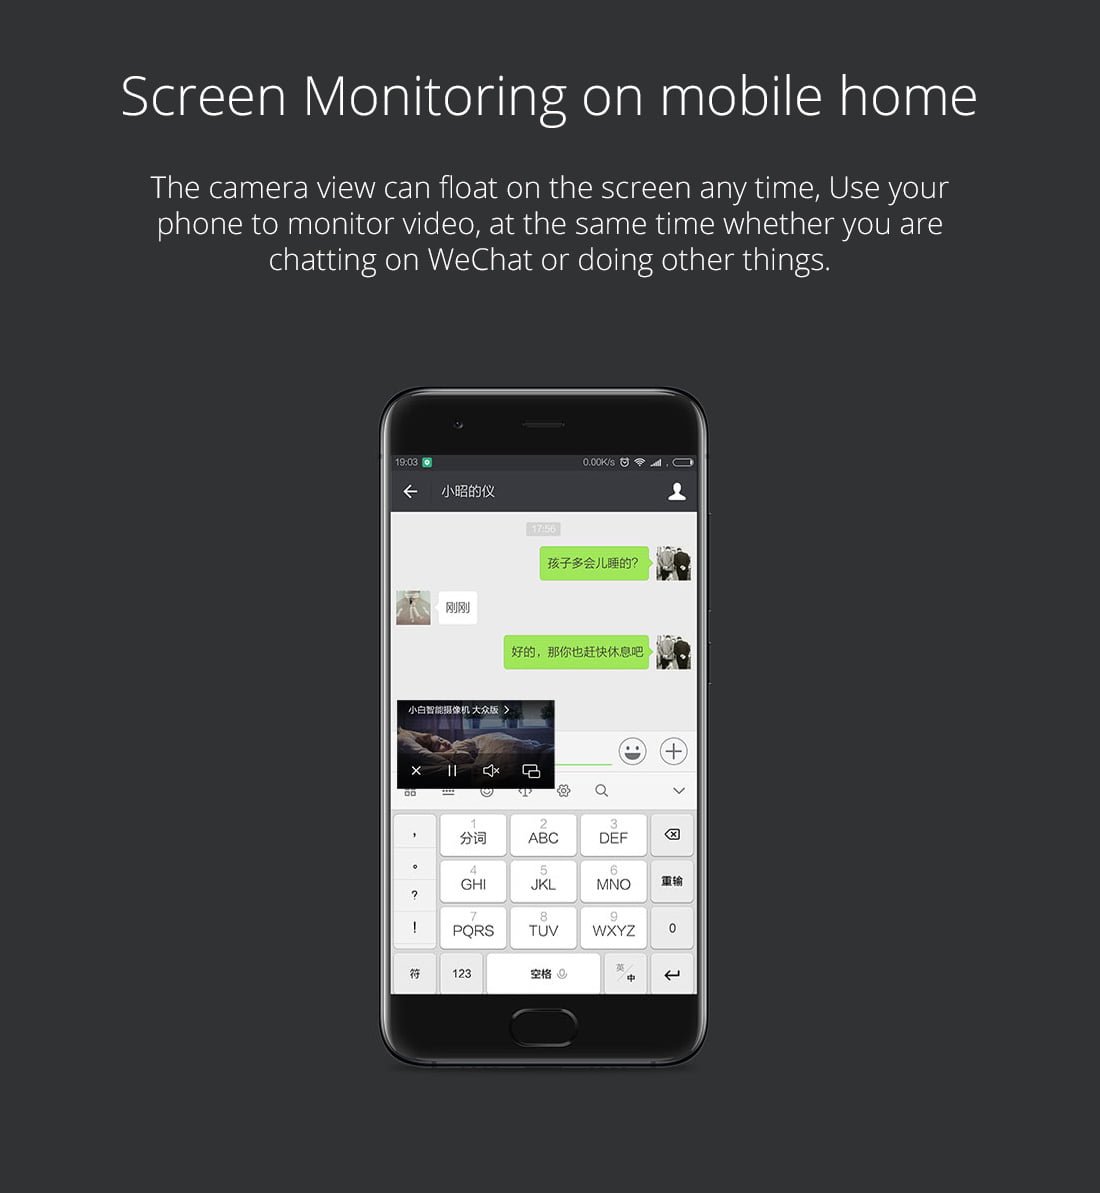 Screen Monitoring on mobile home The camera view can float on the screen any time, Use your phone to monitor video, at the same time whether you are chatting on WeChat or doing other things.